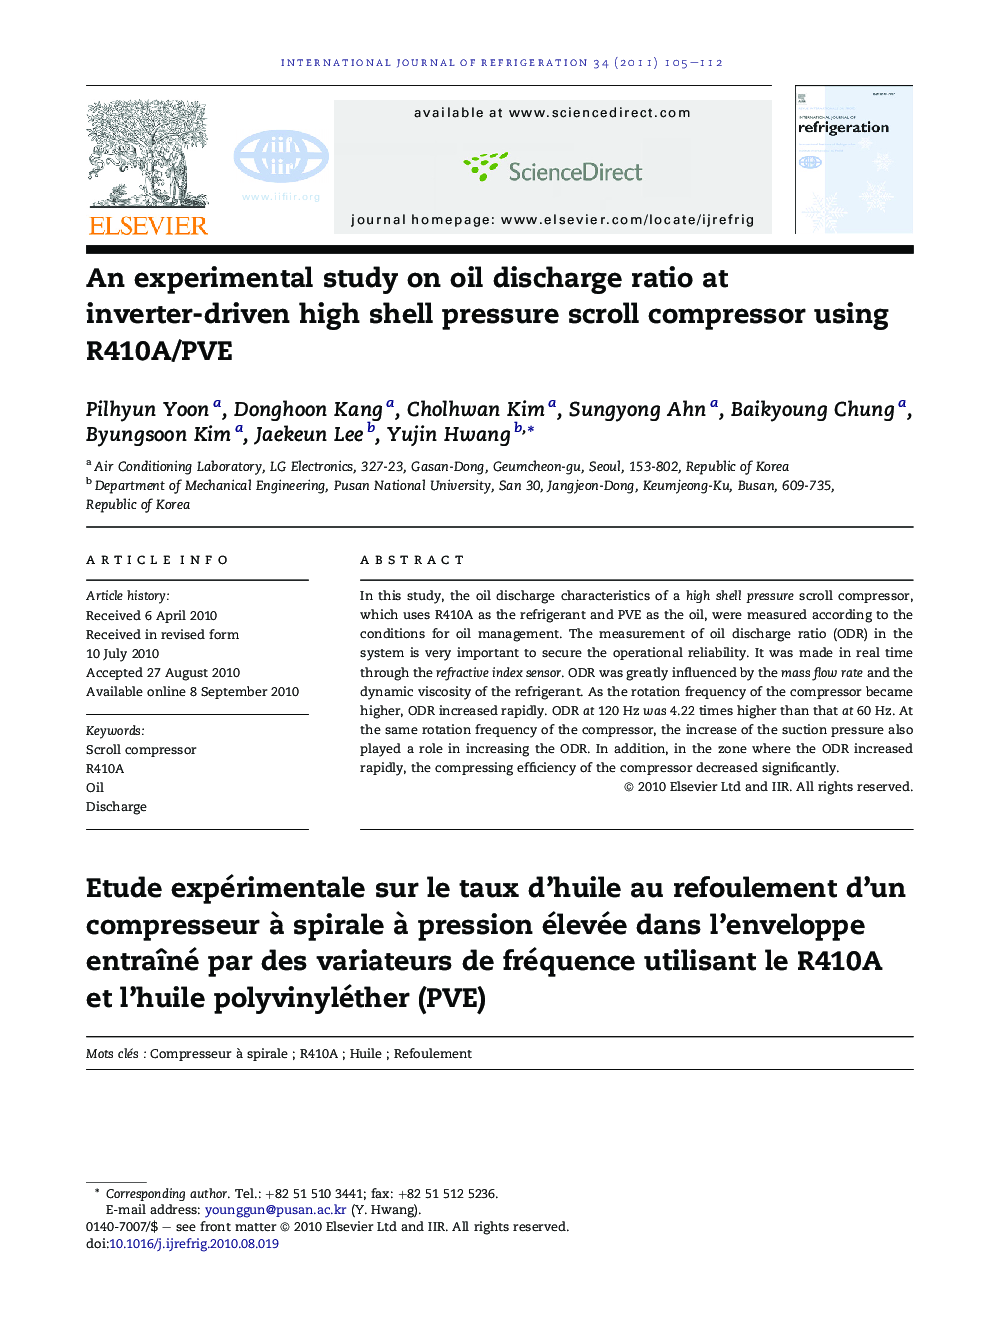 An experimental study on oil discharge ratio at inverter-driven high shell pressure scroll compressor using R410A/PVE